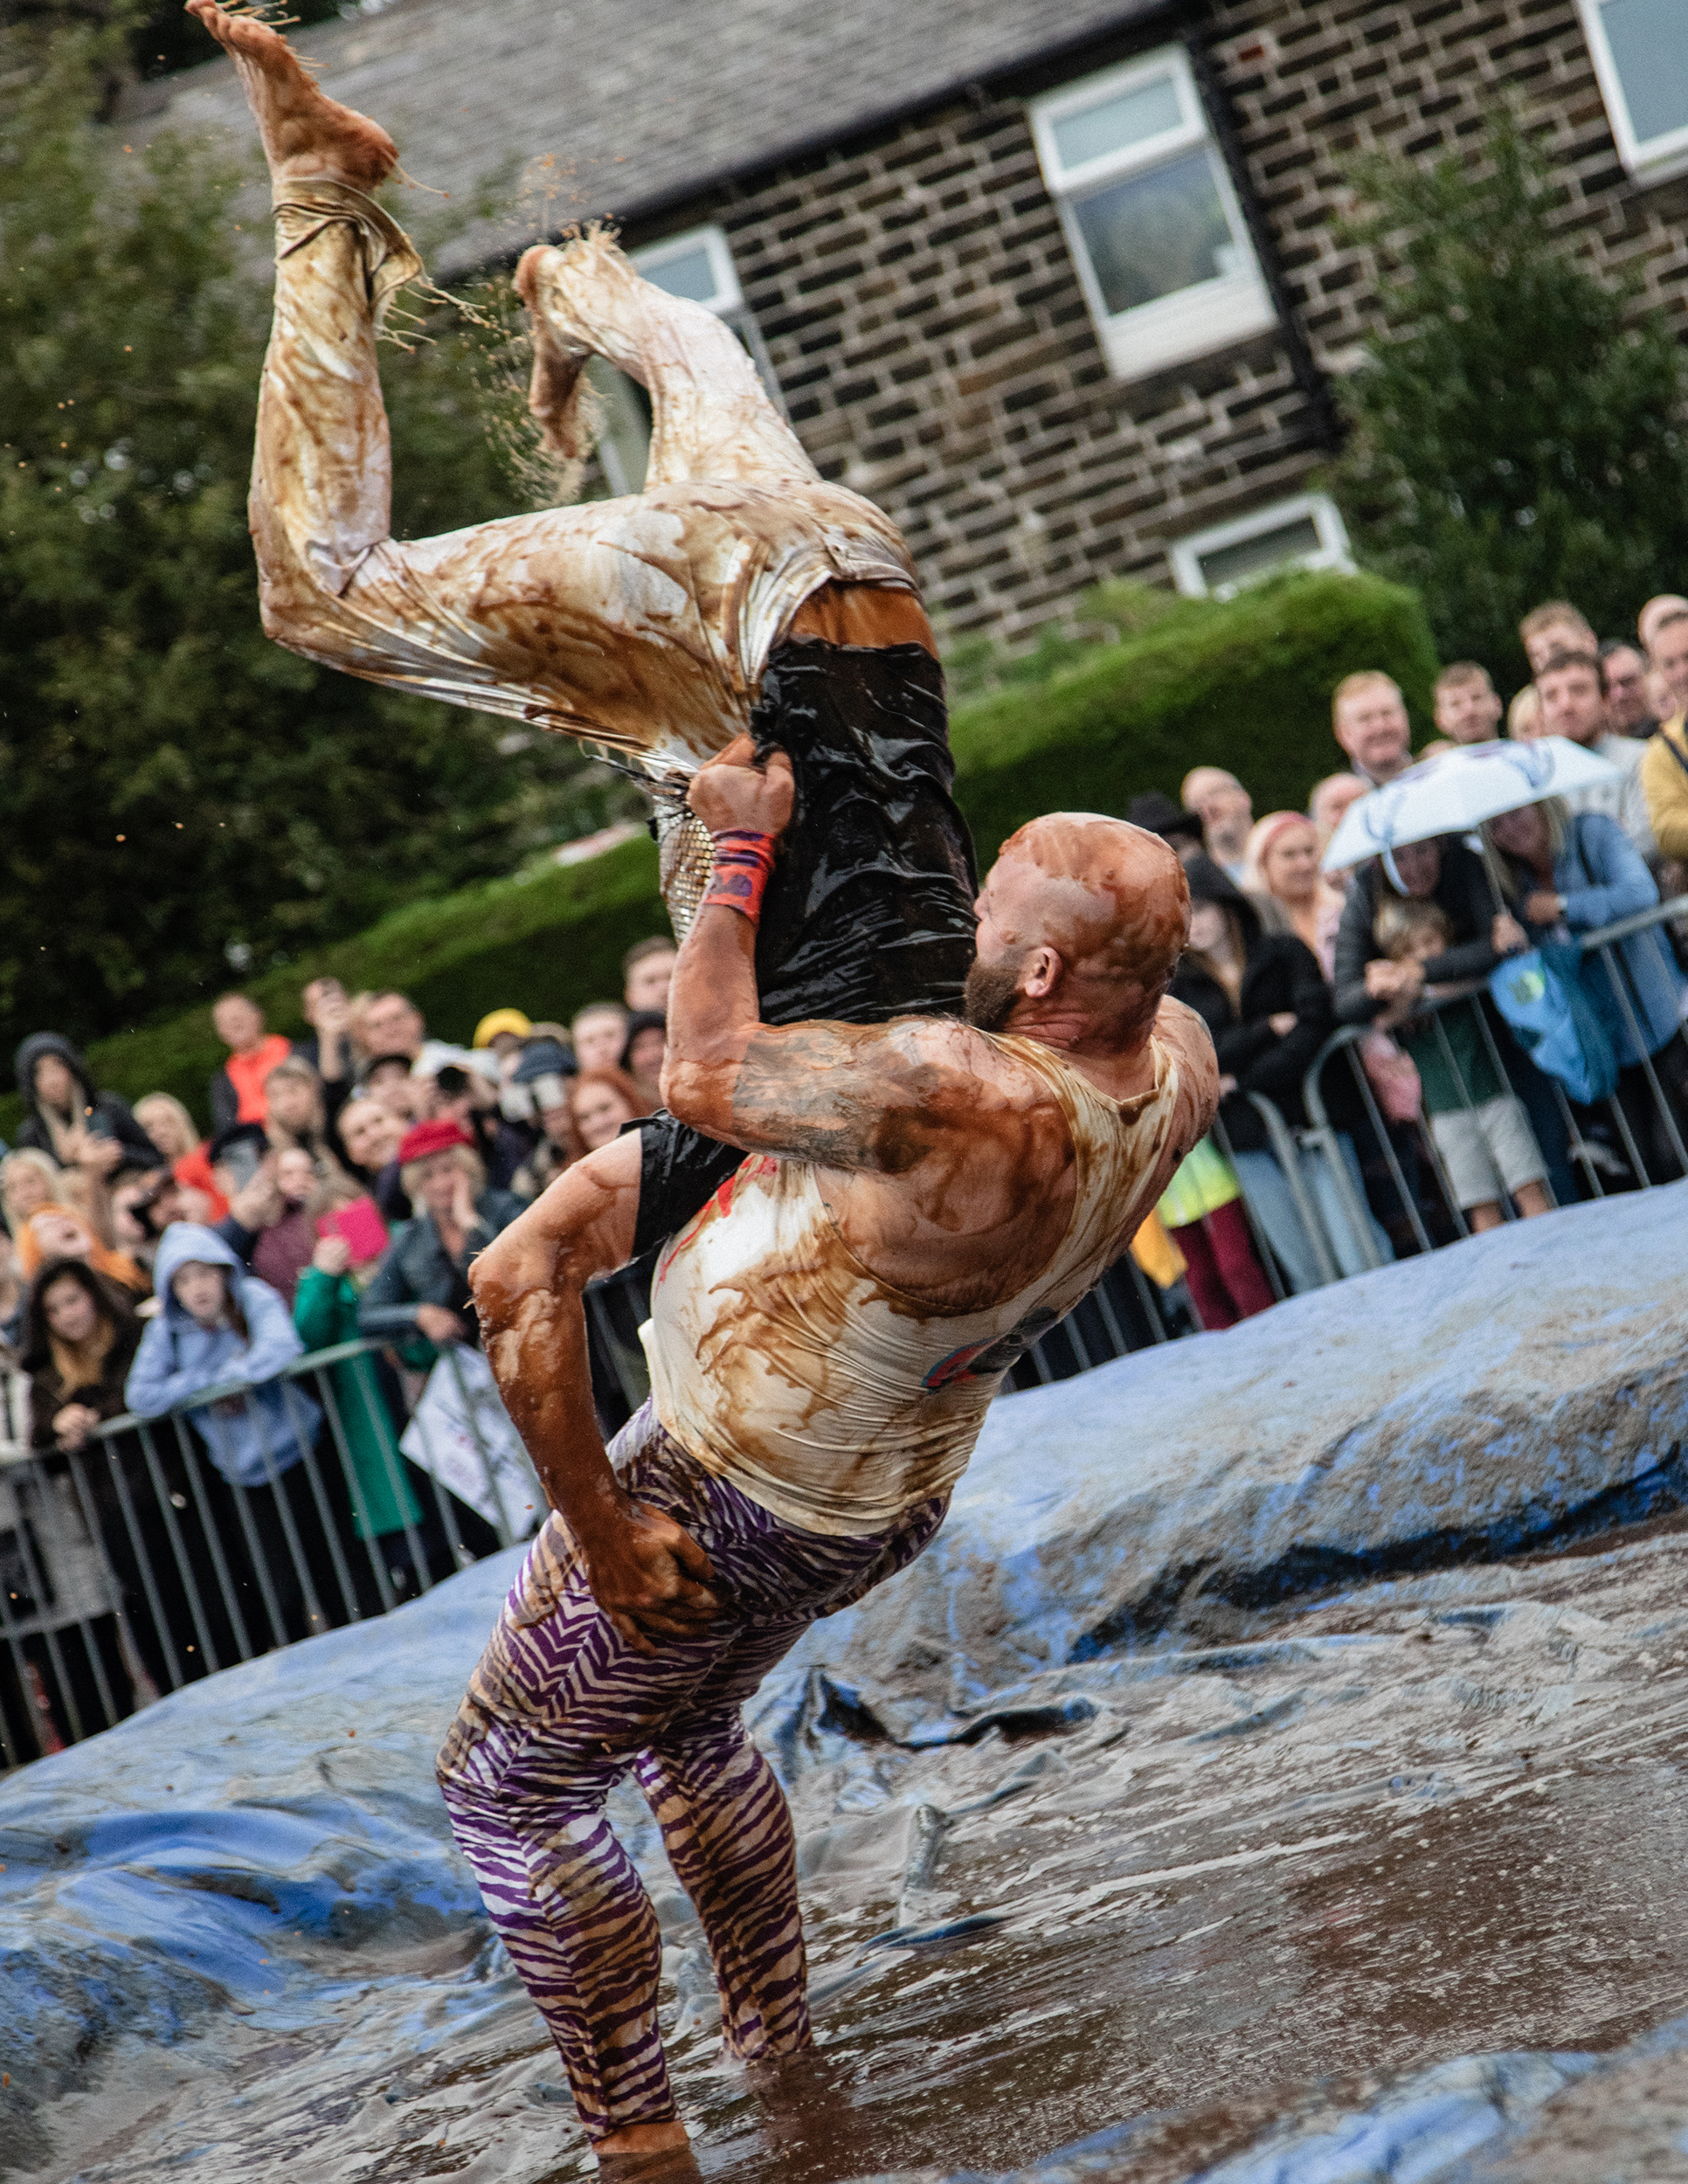 world gravy championships - a photo of two people wrestling in a gravy filled wrestling ring.